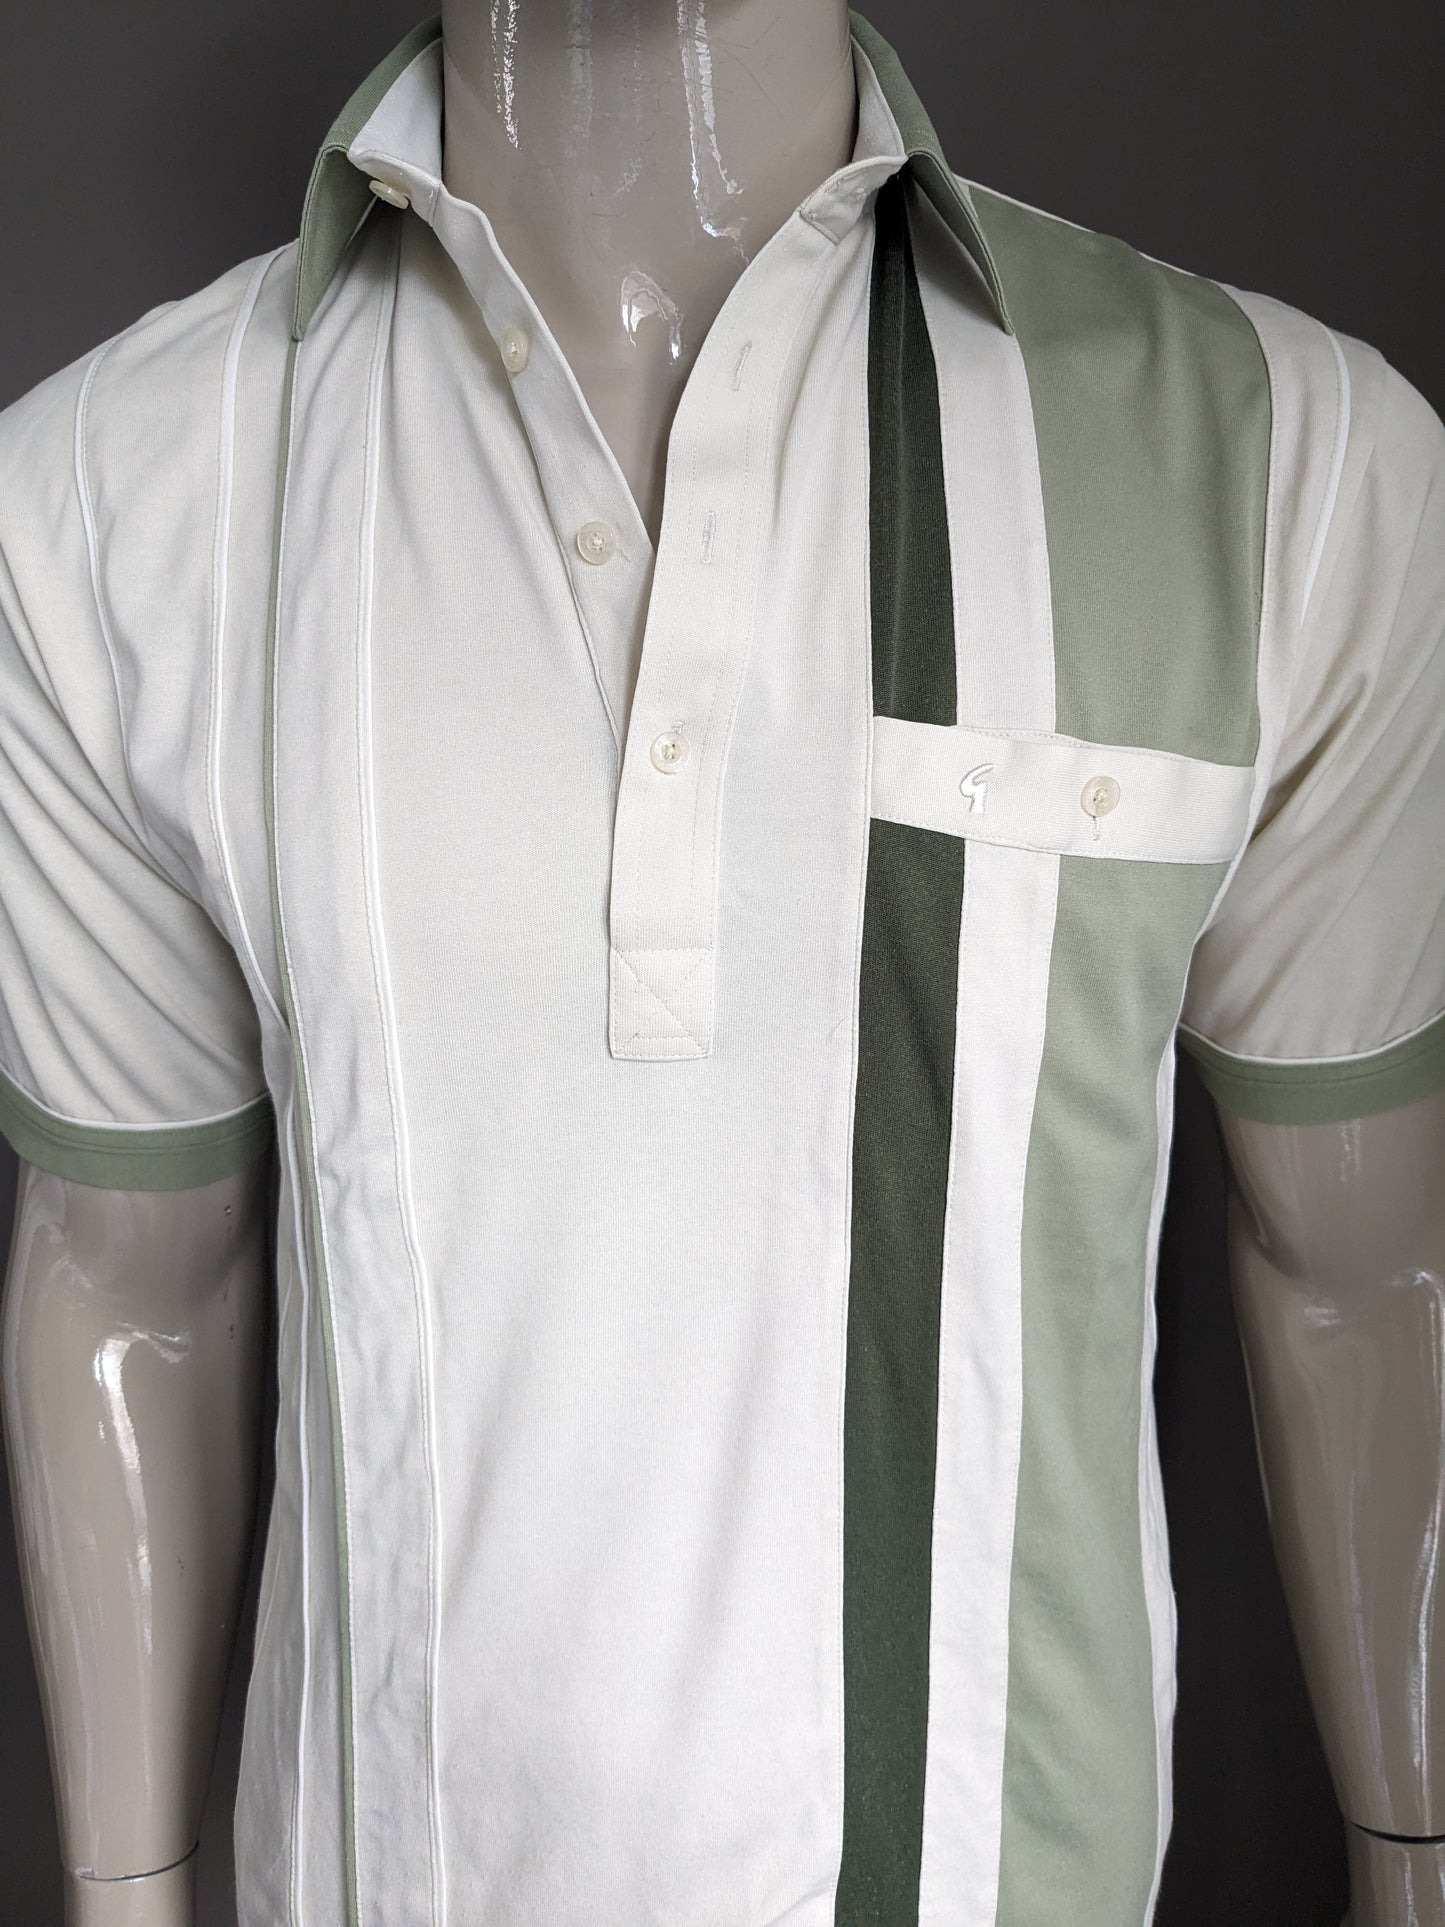 Vintage Gabicci Polo. Beige green colored. Size M.